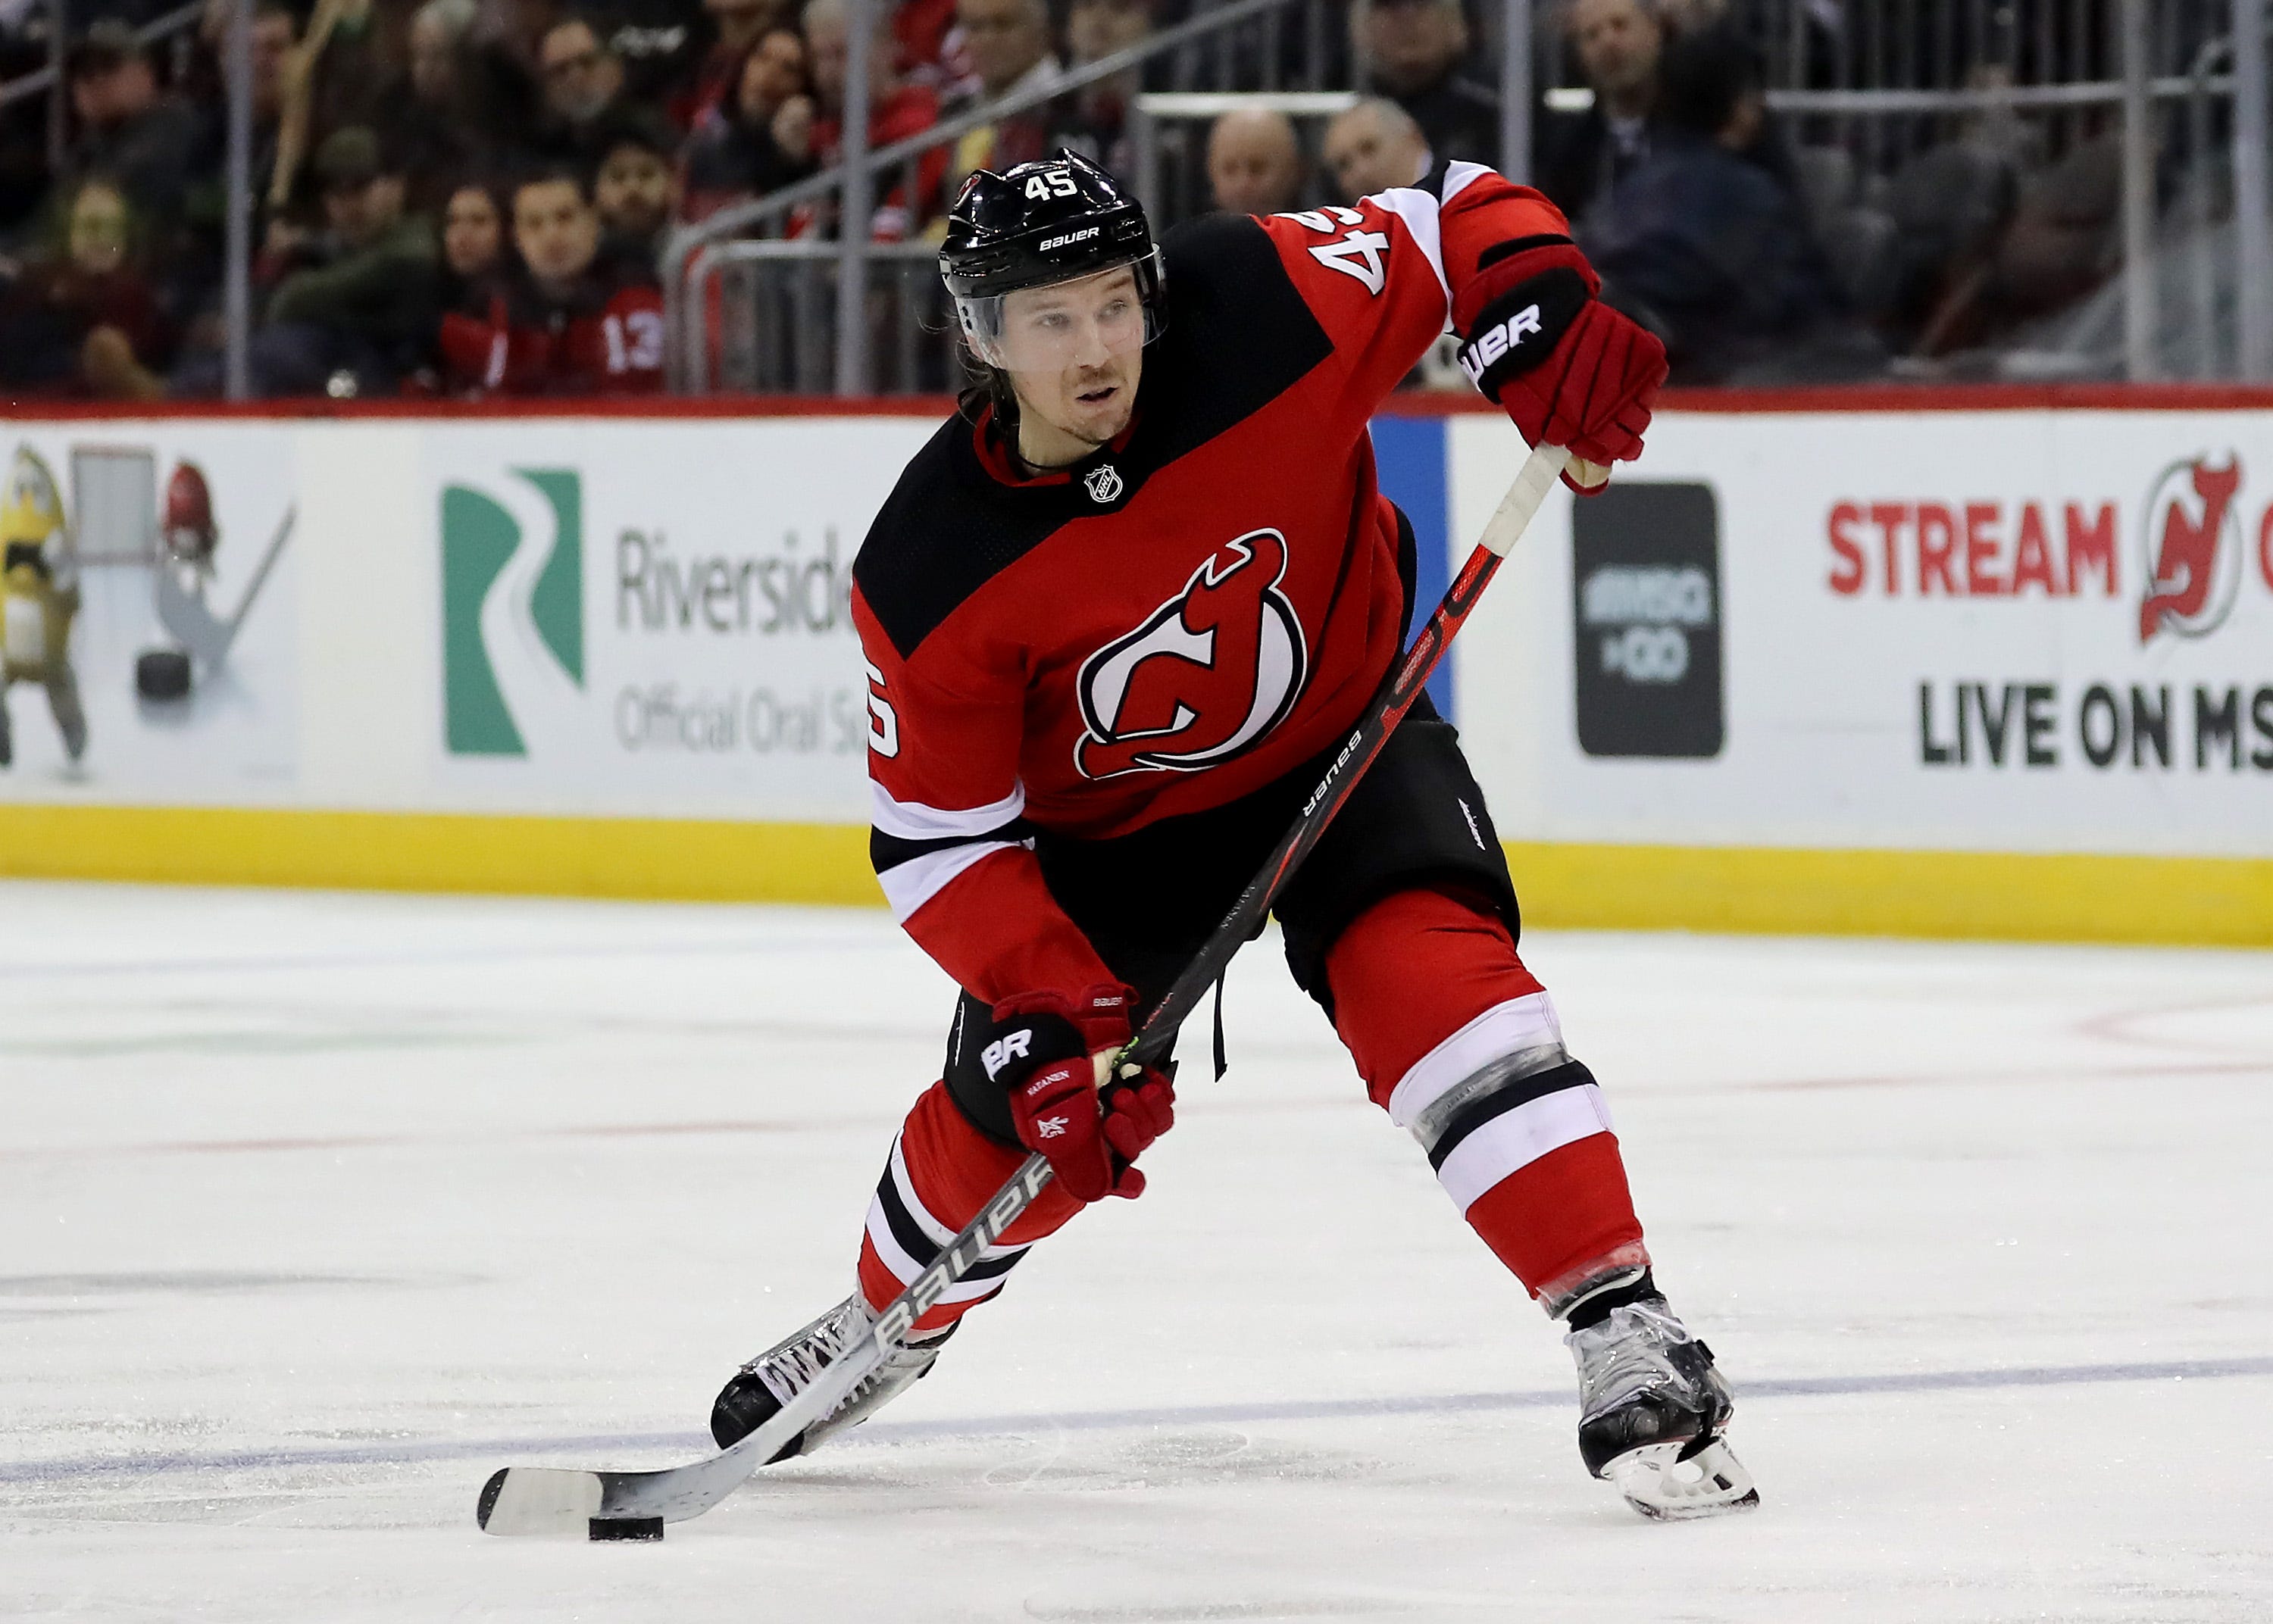 He's back: NJ Devils sign Sami Vatanen to one-year contract to shore up defense unit